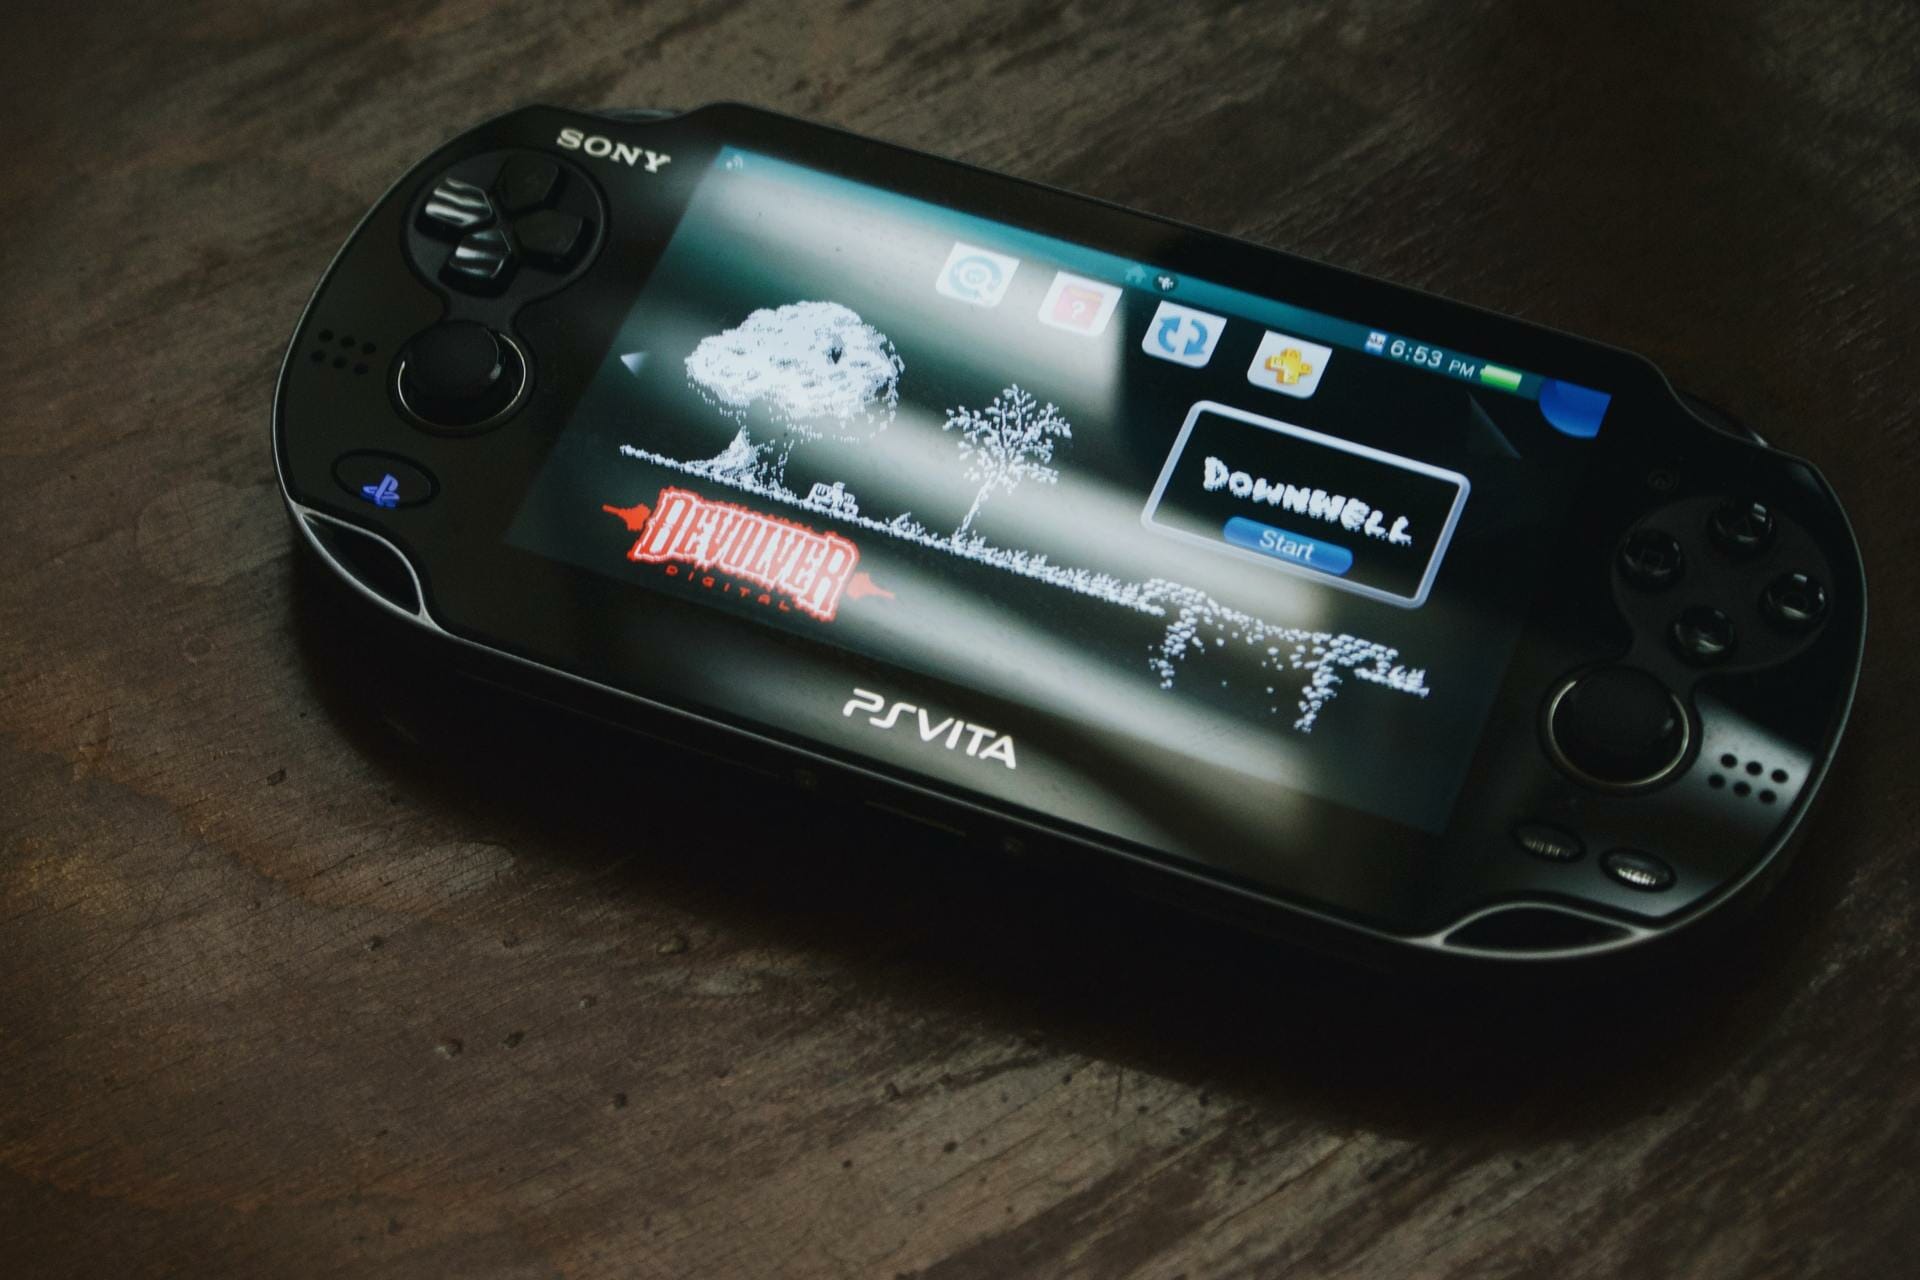 handheld game console with built-in games